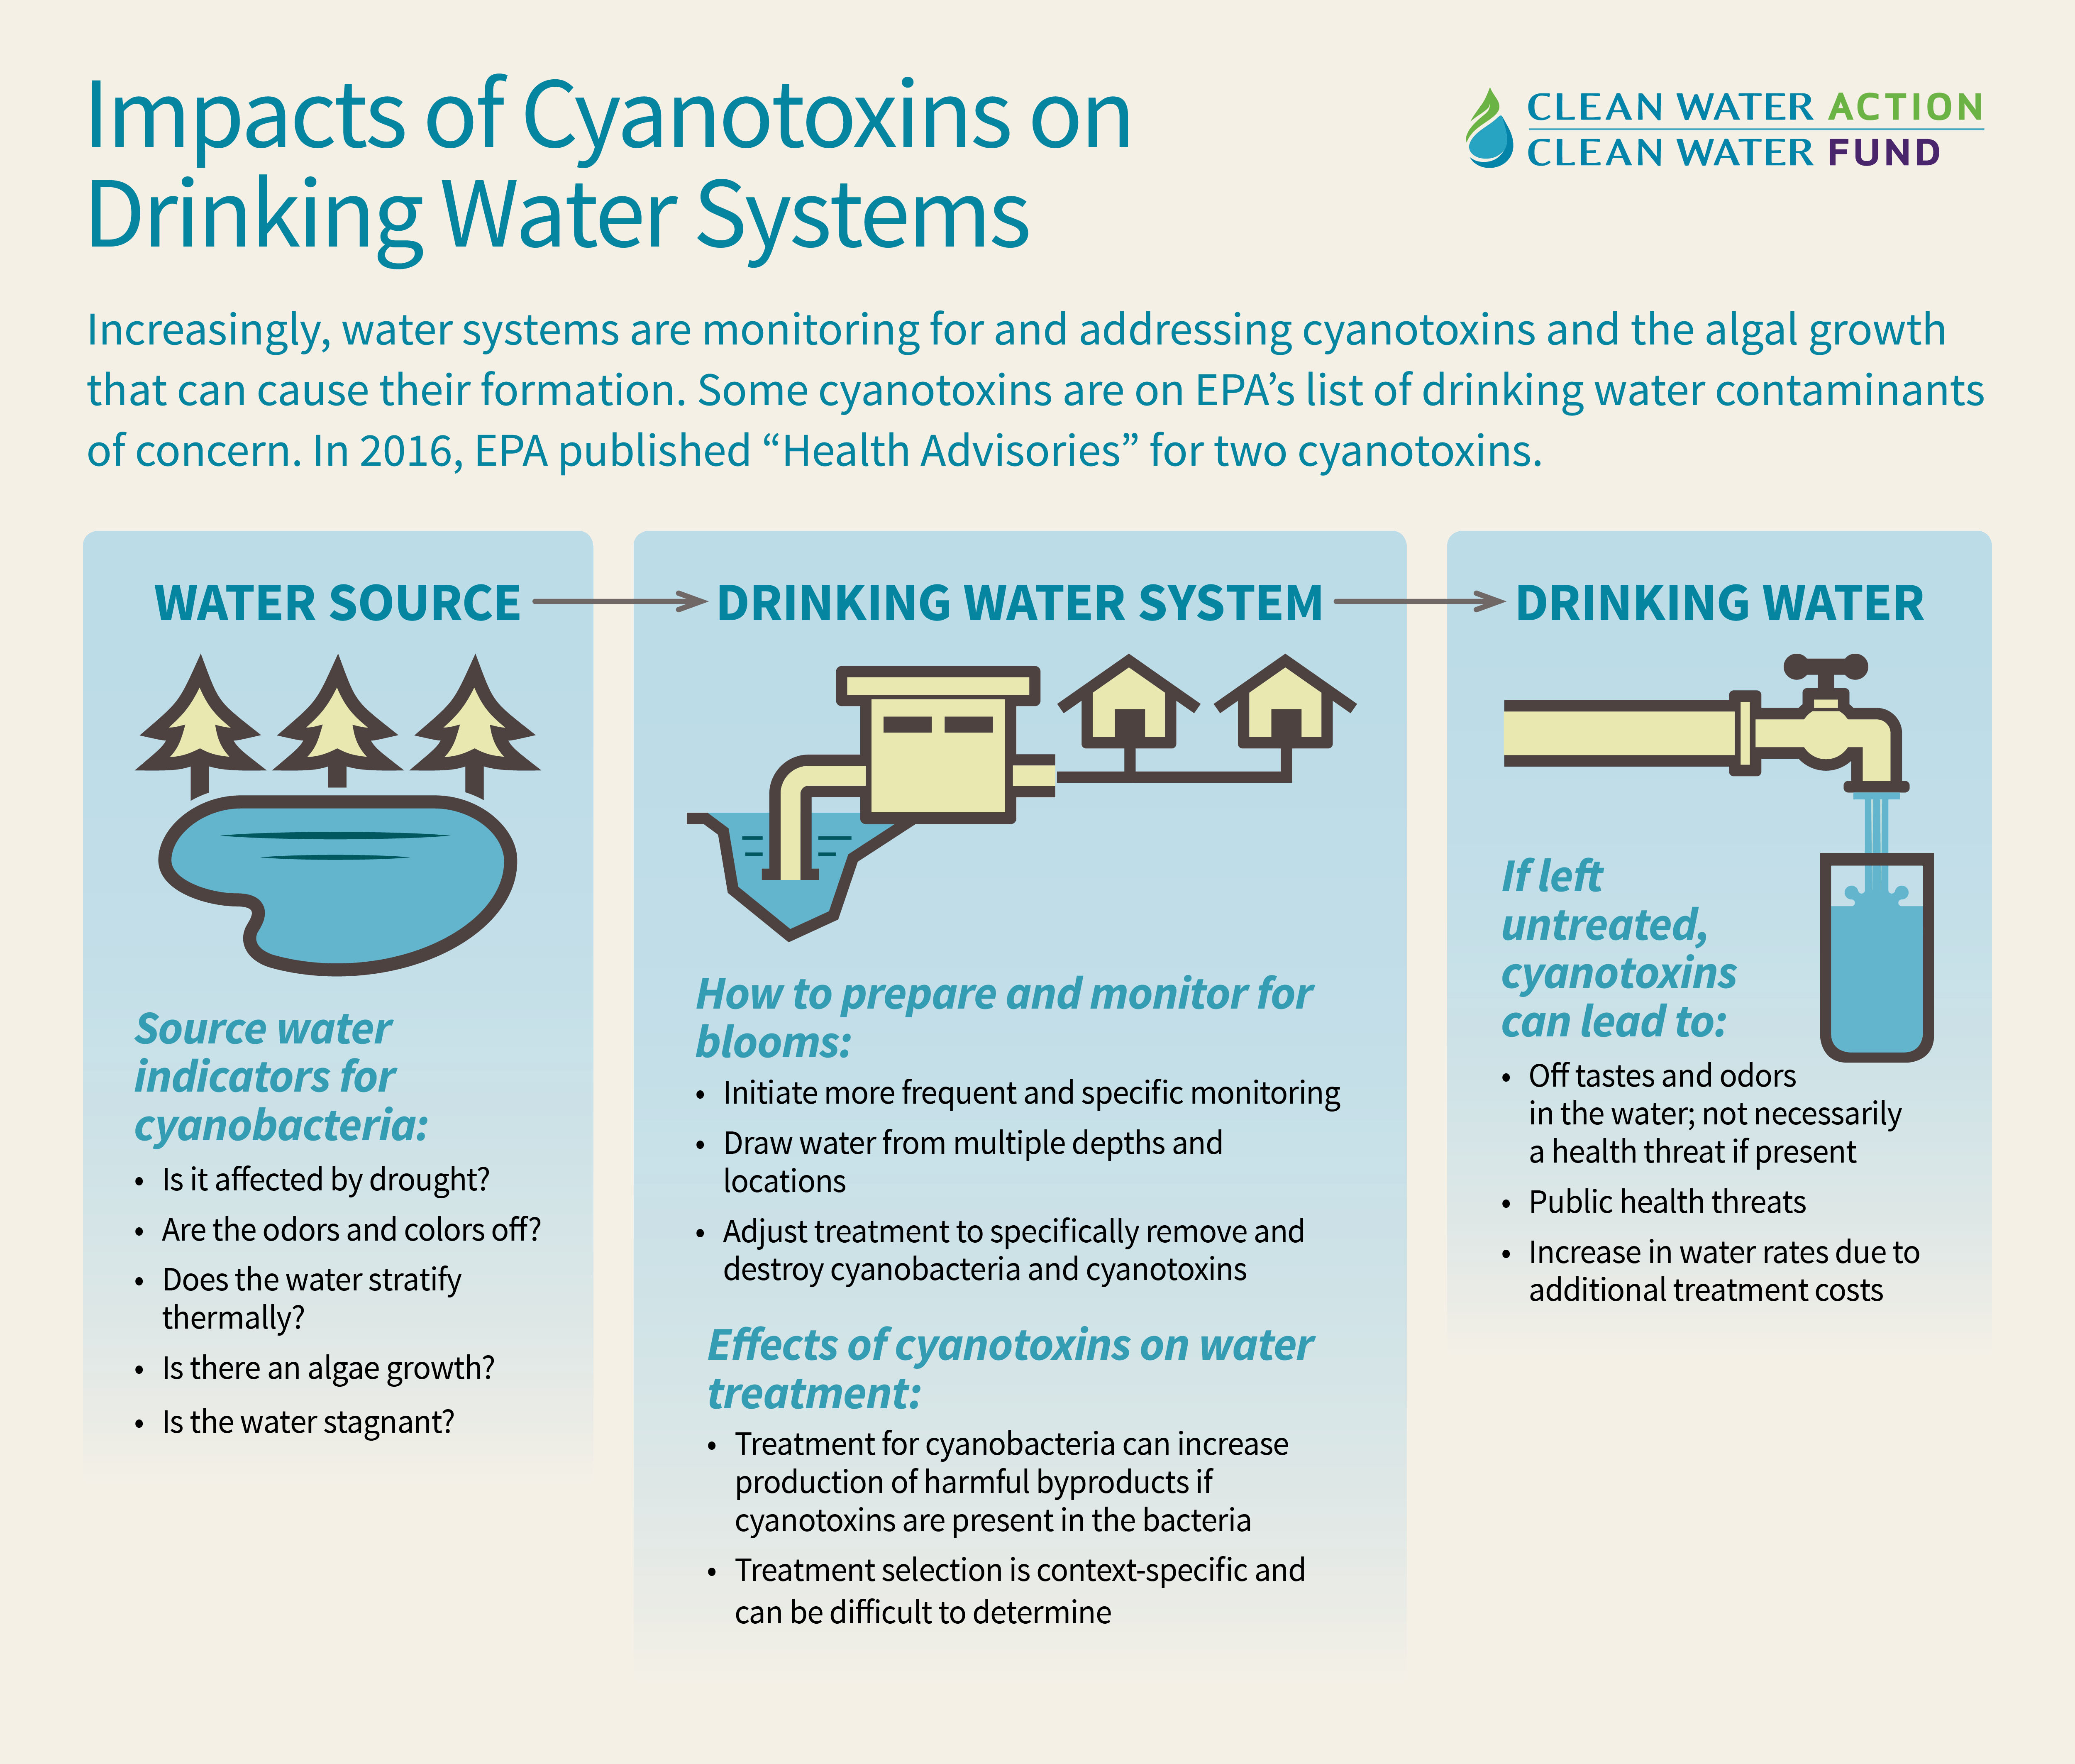 Impacts of Cyanotoxins on Drinking Water systems - Clean Water Action